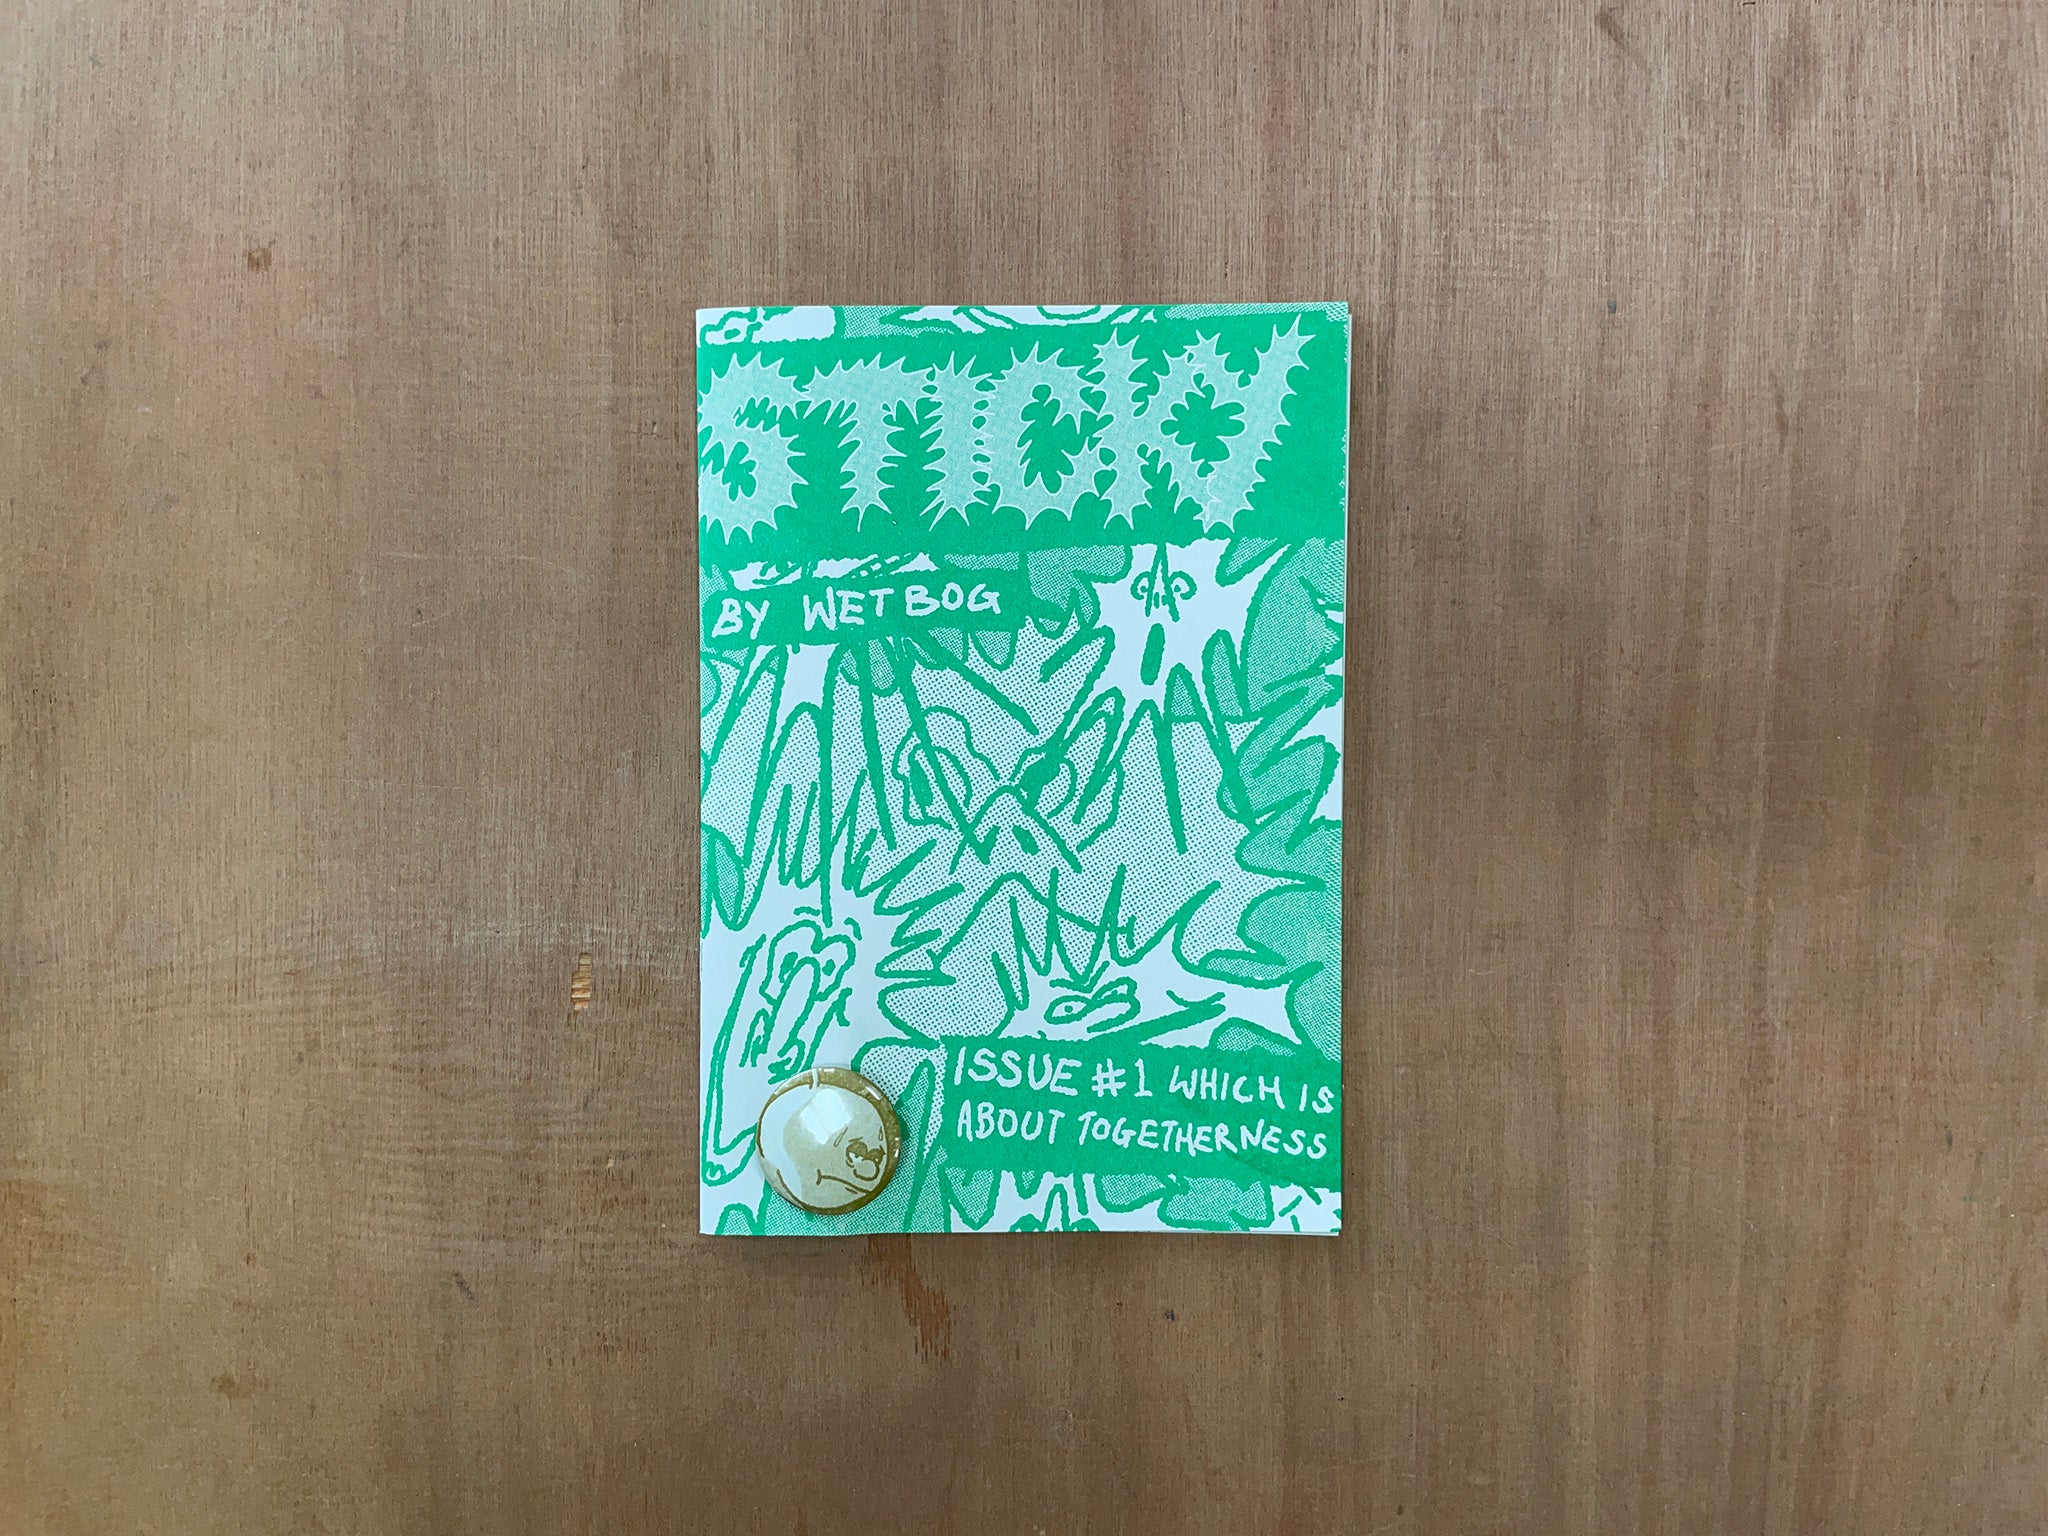 STICKY ISSUE #1 by Wet Bog